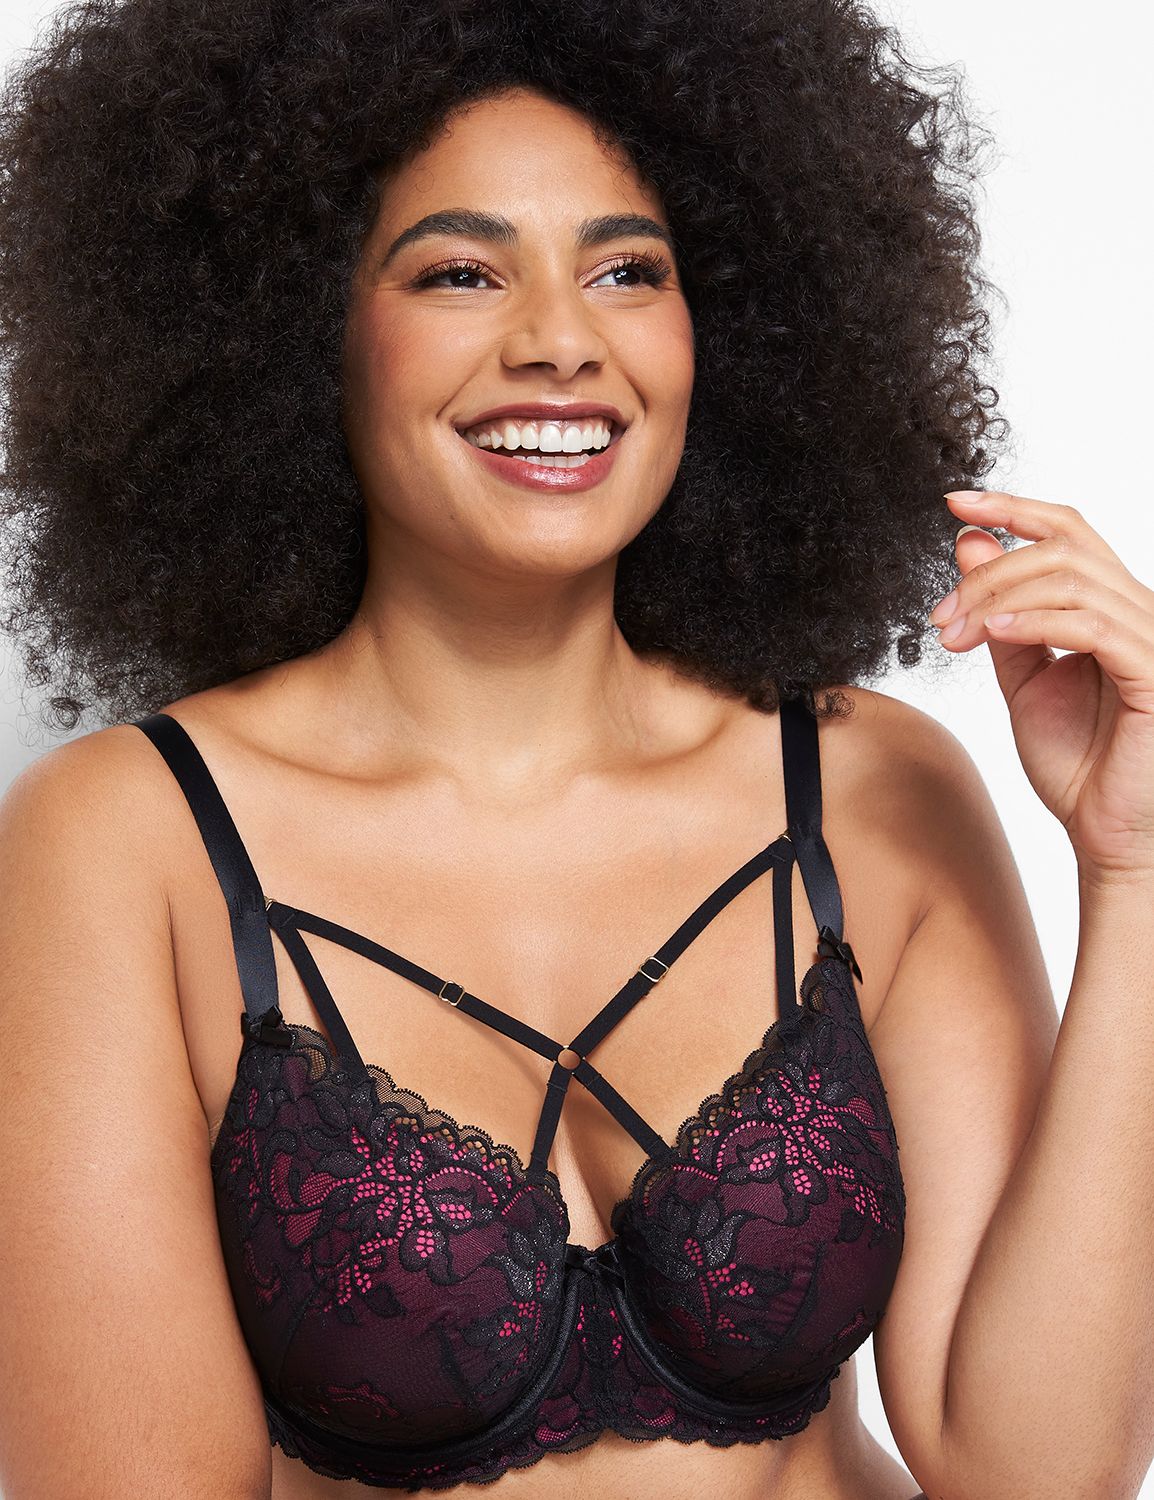 6IXTY8IGHT - 🖤Strappy Bras! They look really awesome peeking out of a  low-cut shirt. #68Fashion #68Lingerie 🔍Strappy Lightly Padded Balcony Bra:  BR08460 🔍Lace Strappy Lightly Padded Bralette: BR08459 🔍Lace Low-rise  Hipster Panty